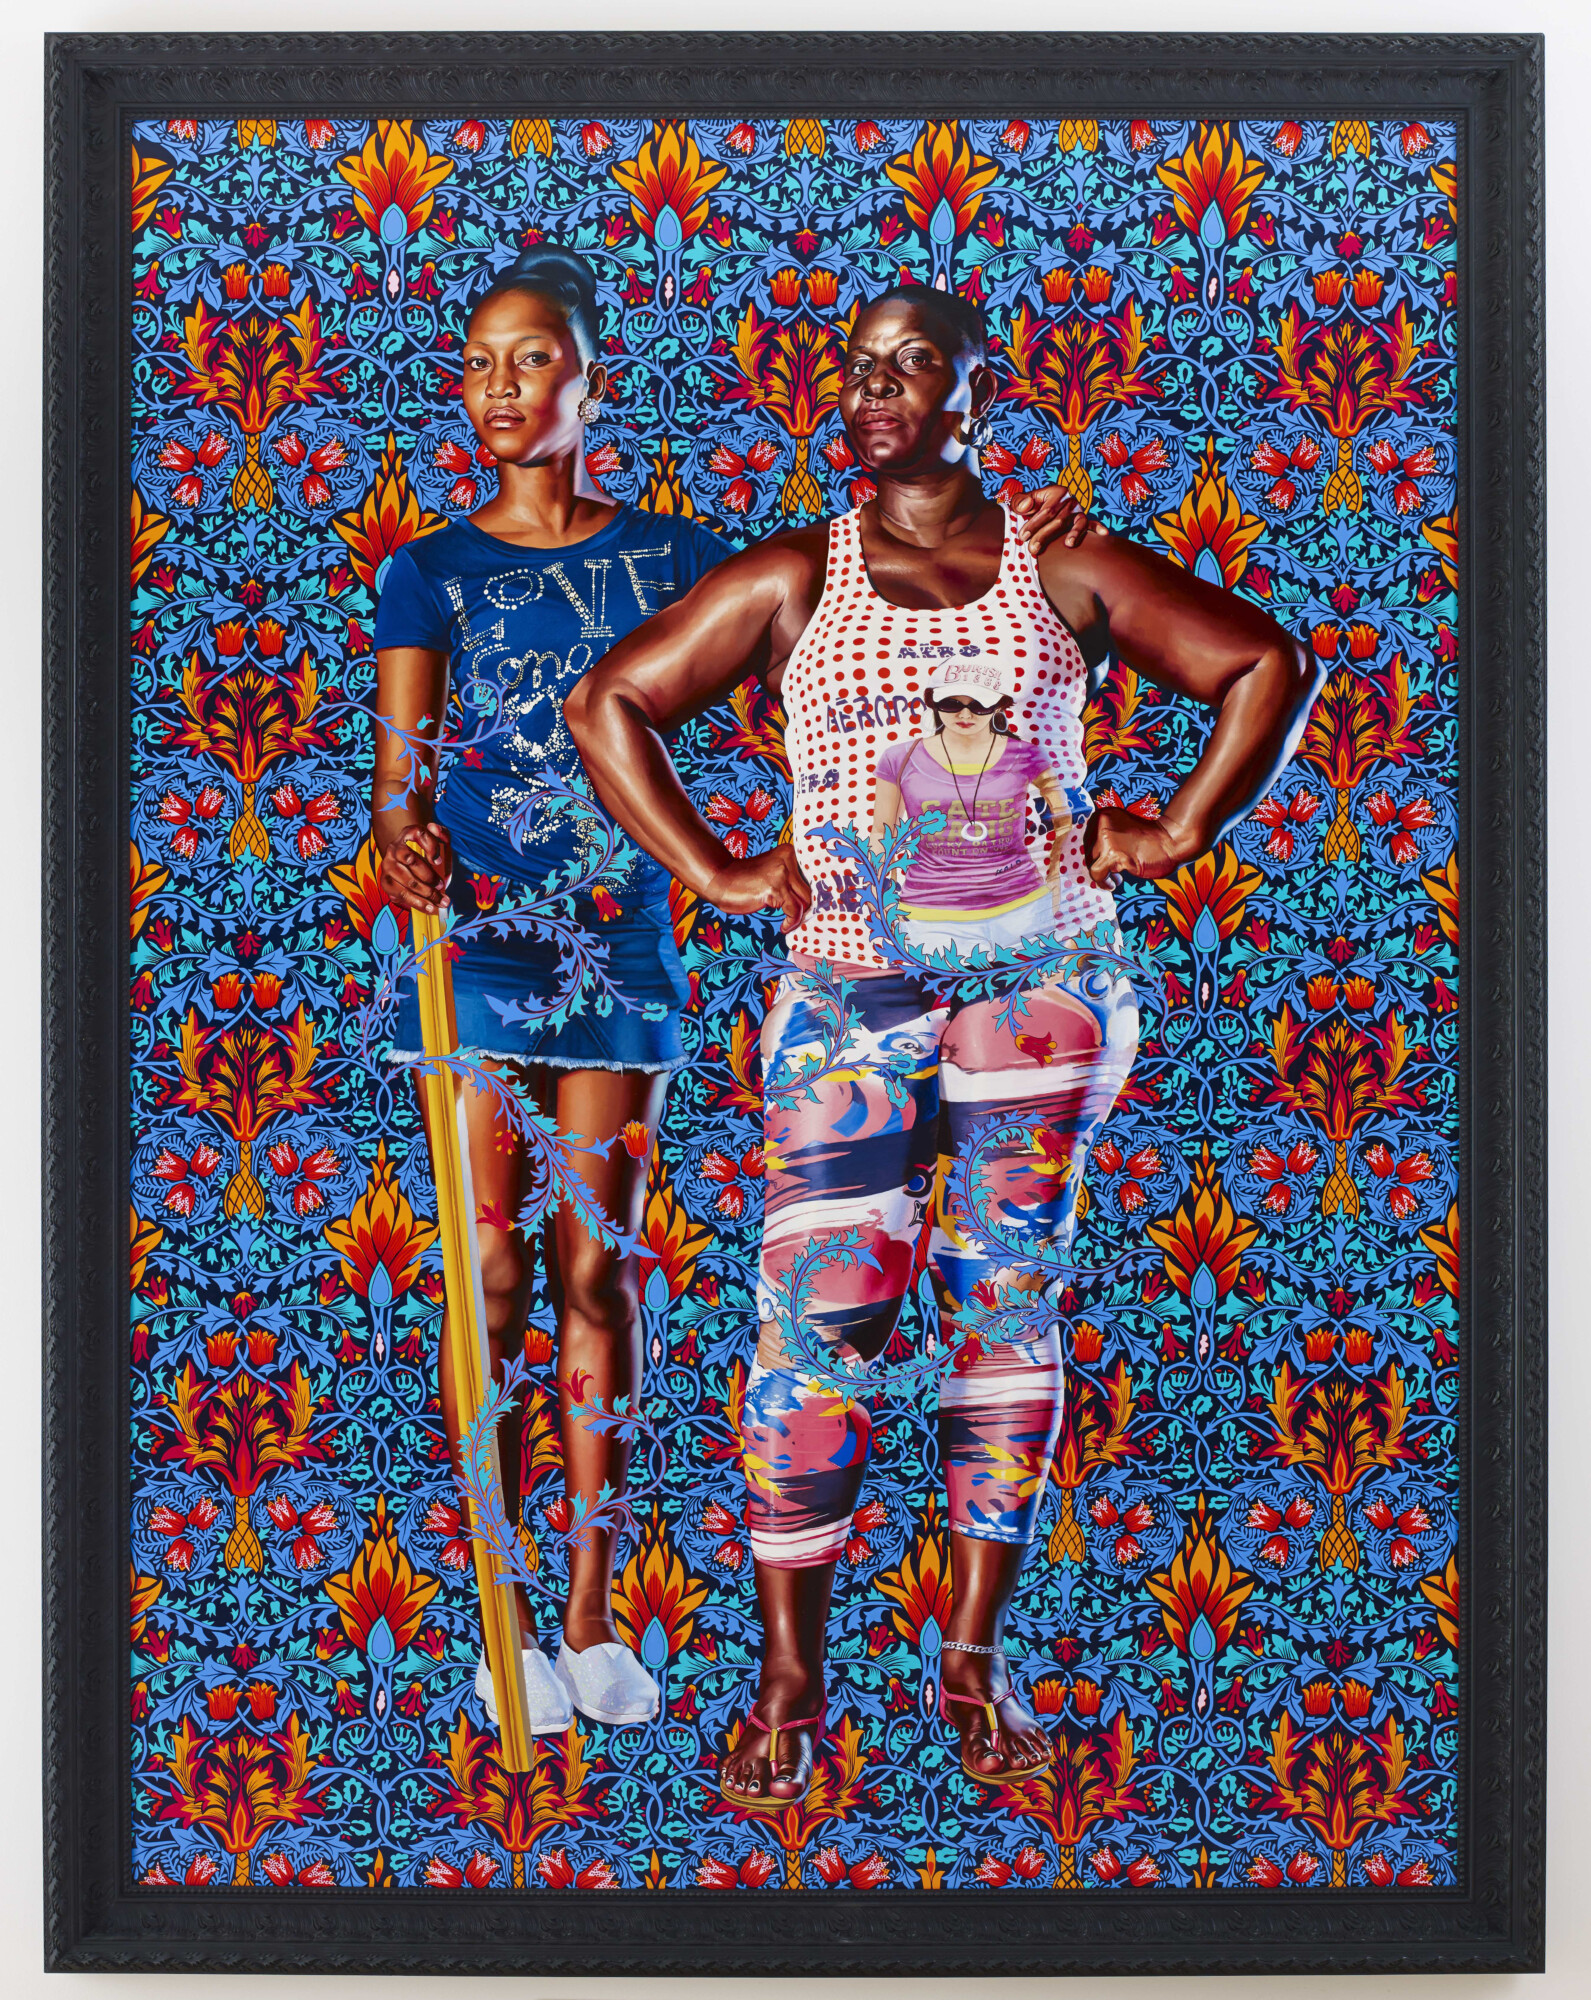 kehindewiley_a new republic_portrait of john and george soane